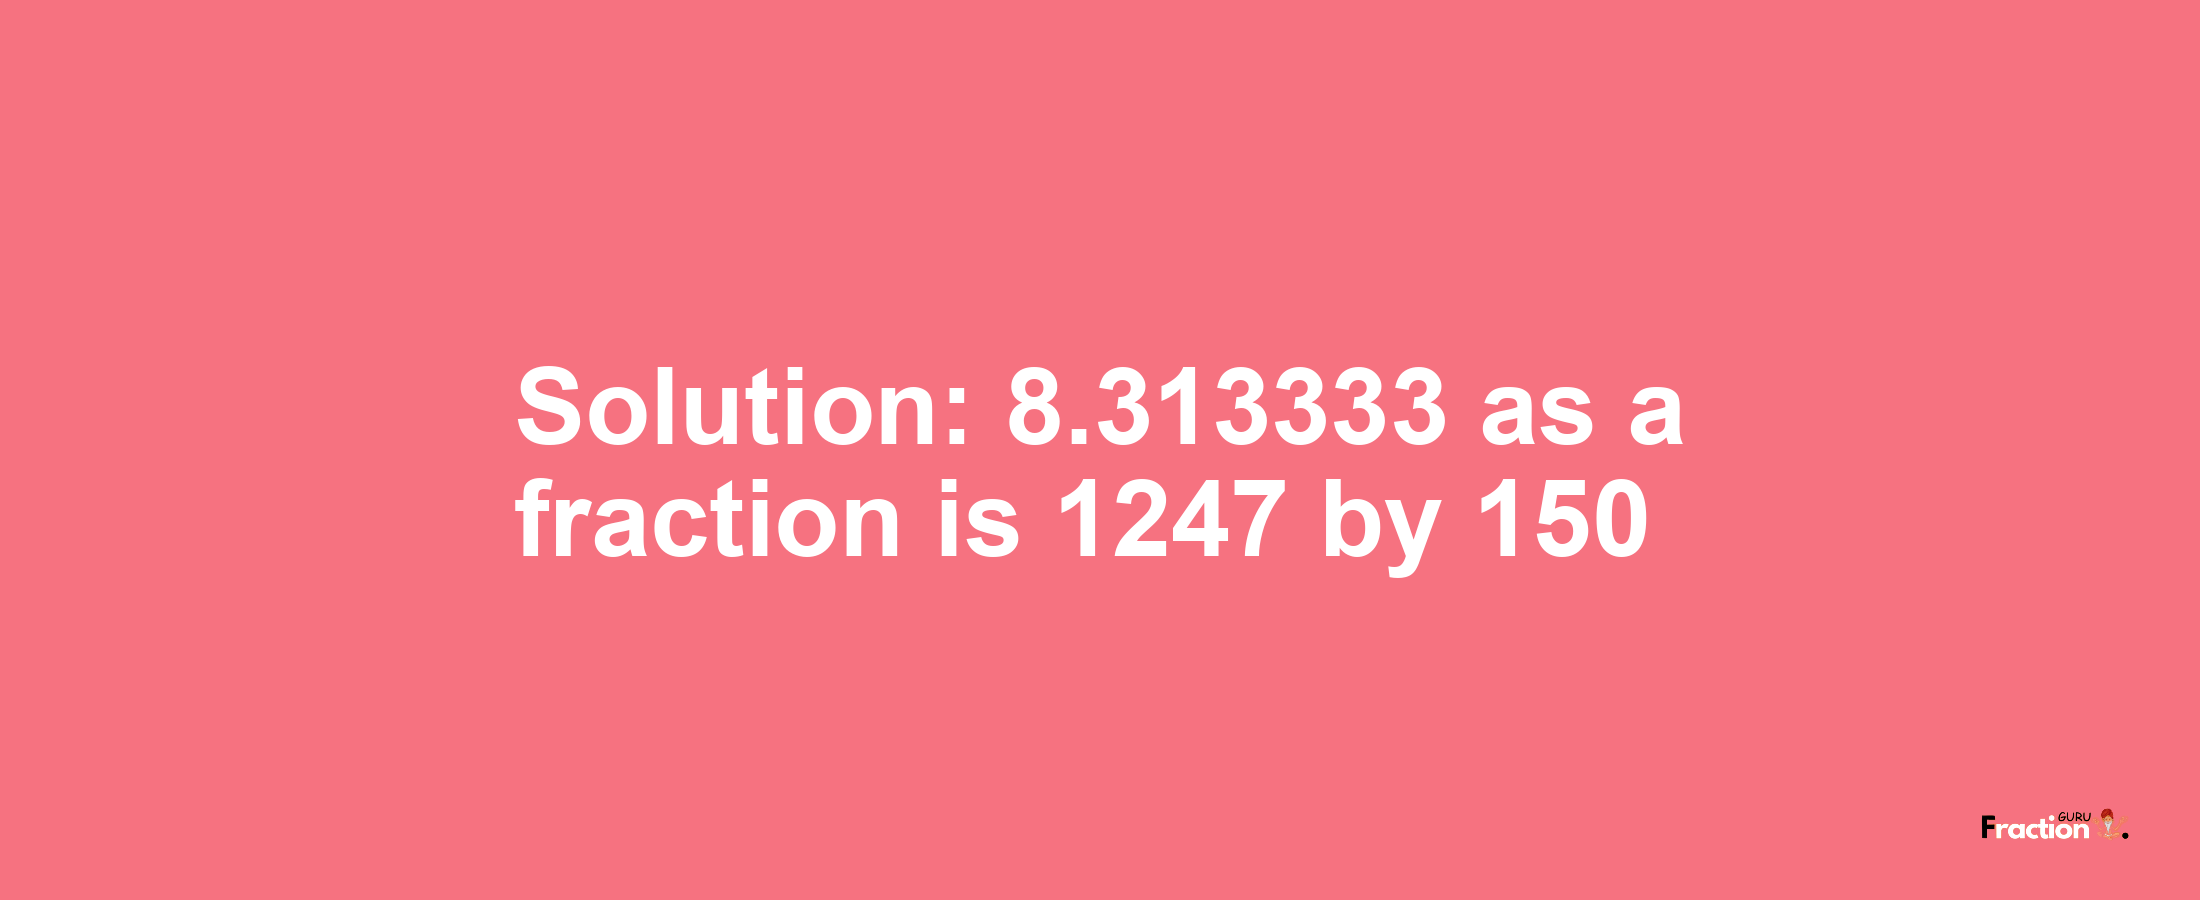 Solution:8.313333 as a fraction is 1247/150